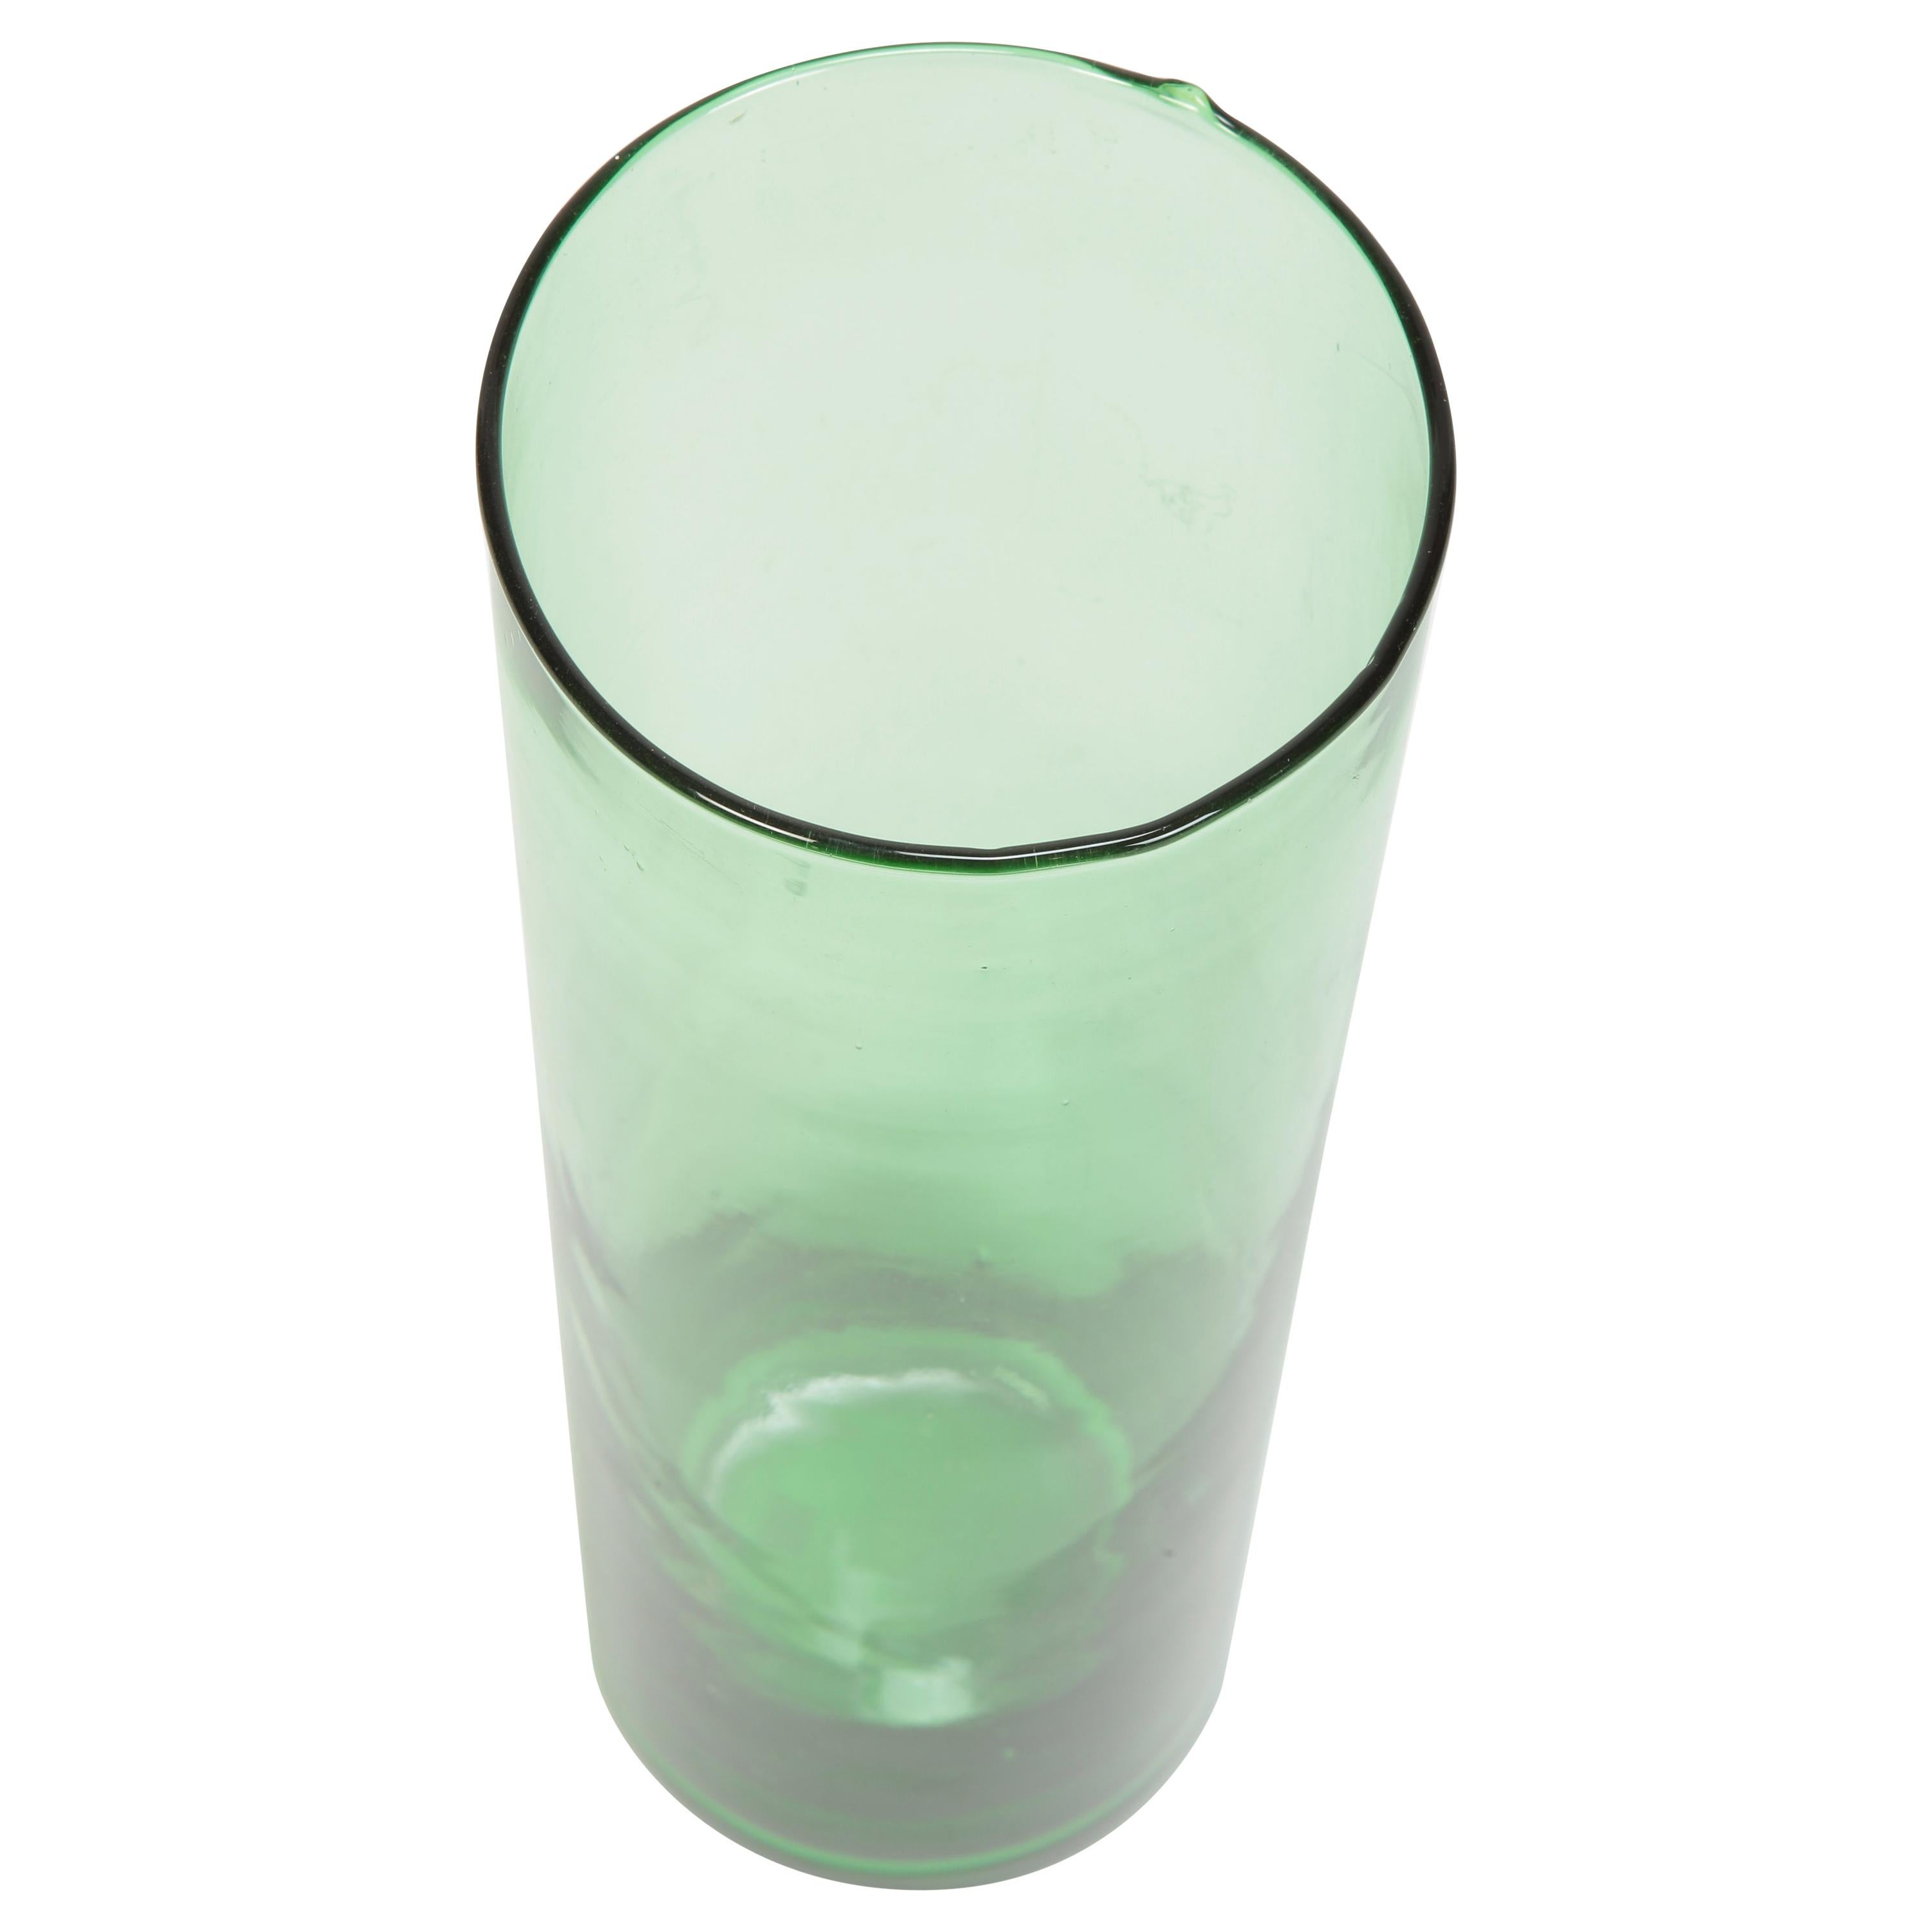 Vase manufactured by Vetro Verde di Empoli in the 1960s in Italy. Cylindrical, thin-walled vase out of luminous green glass.